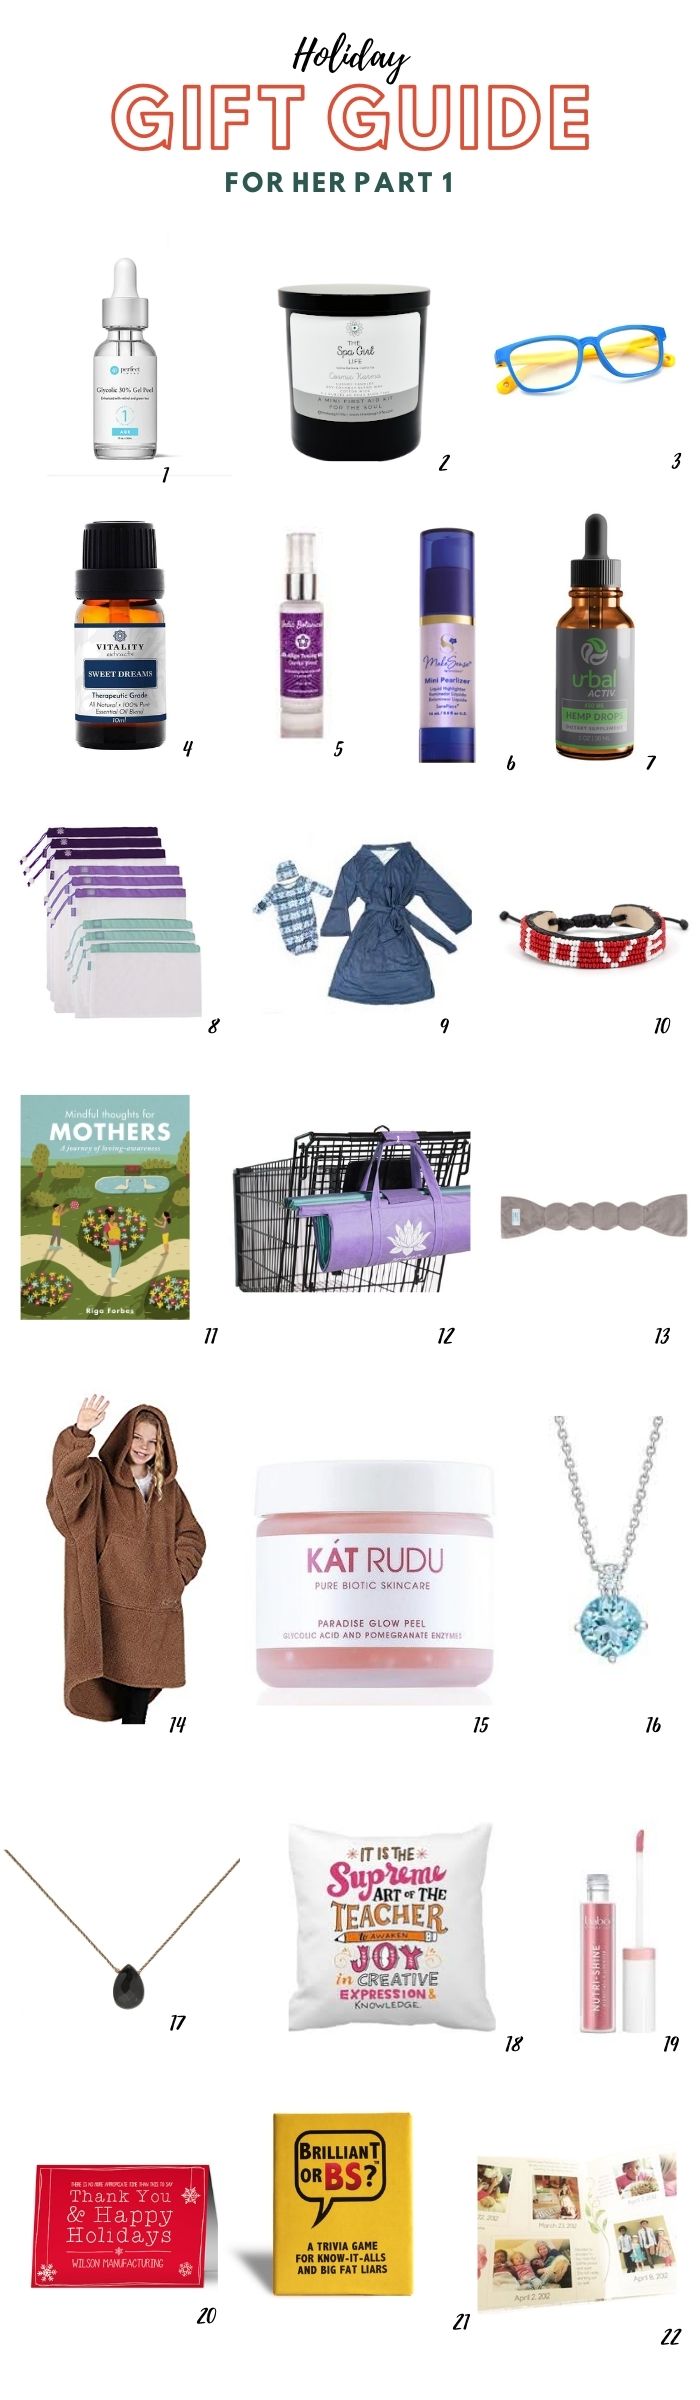 Holiday Gift Guide for Men and Women 2020